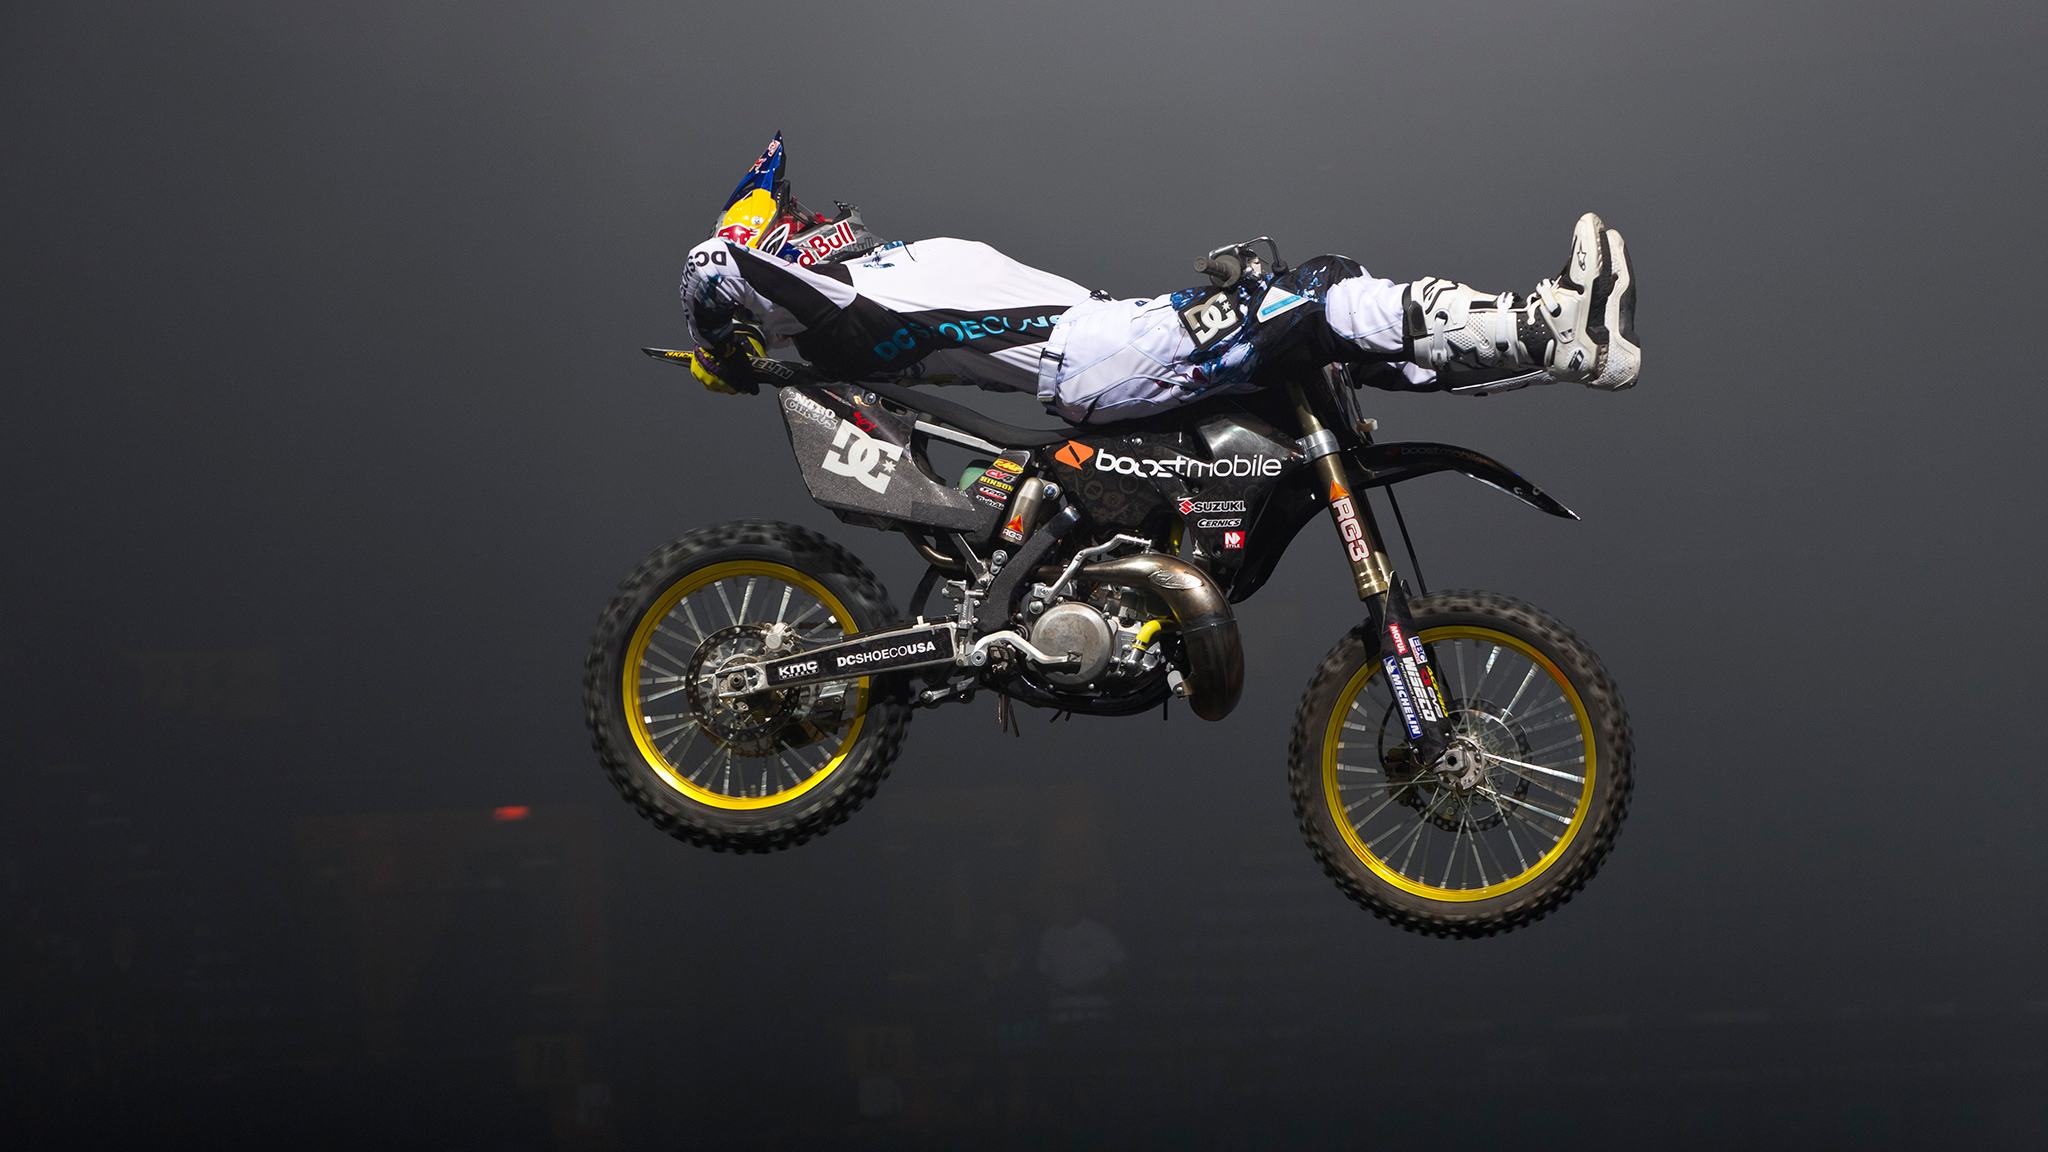 Travis Pastrana wants to set records in new movie 'Action Figures'